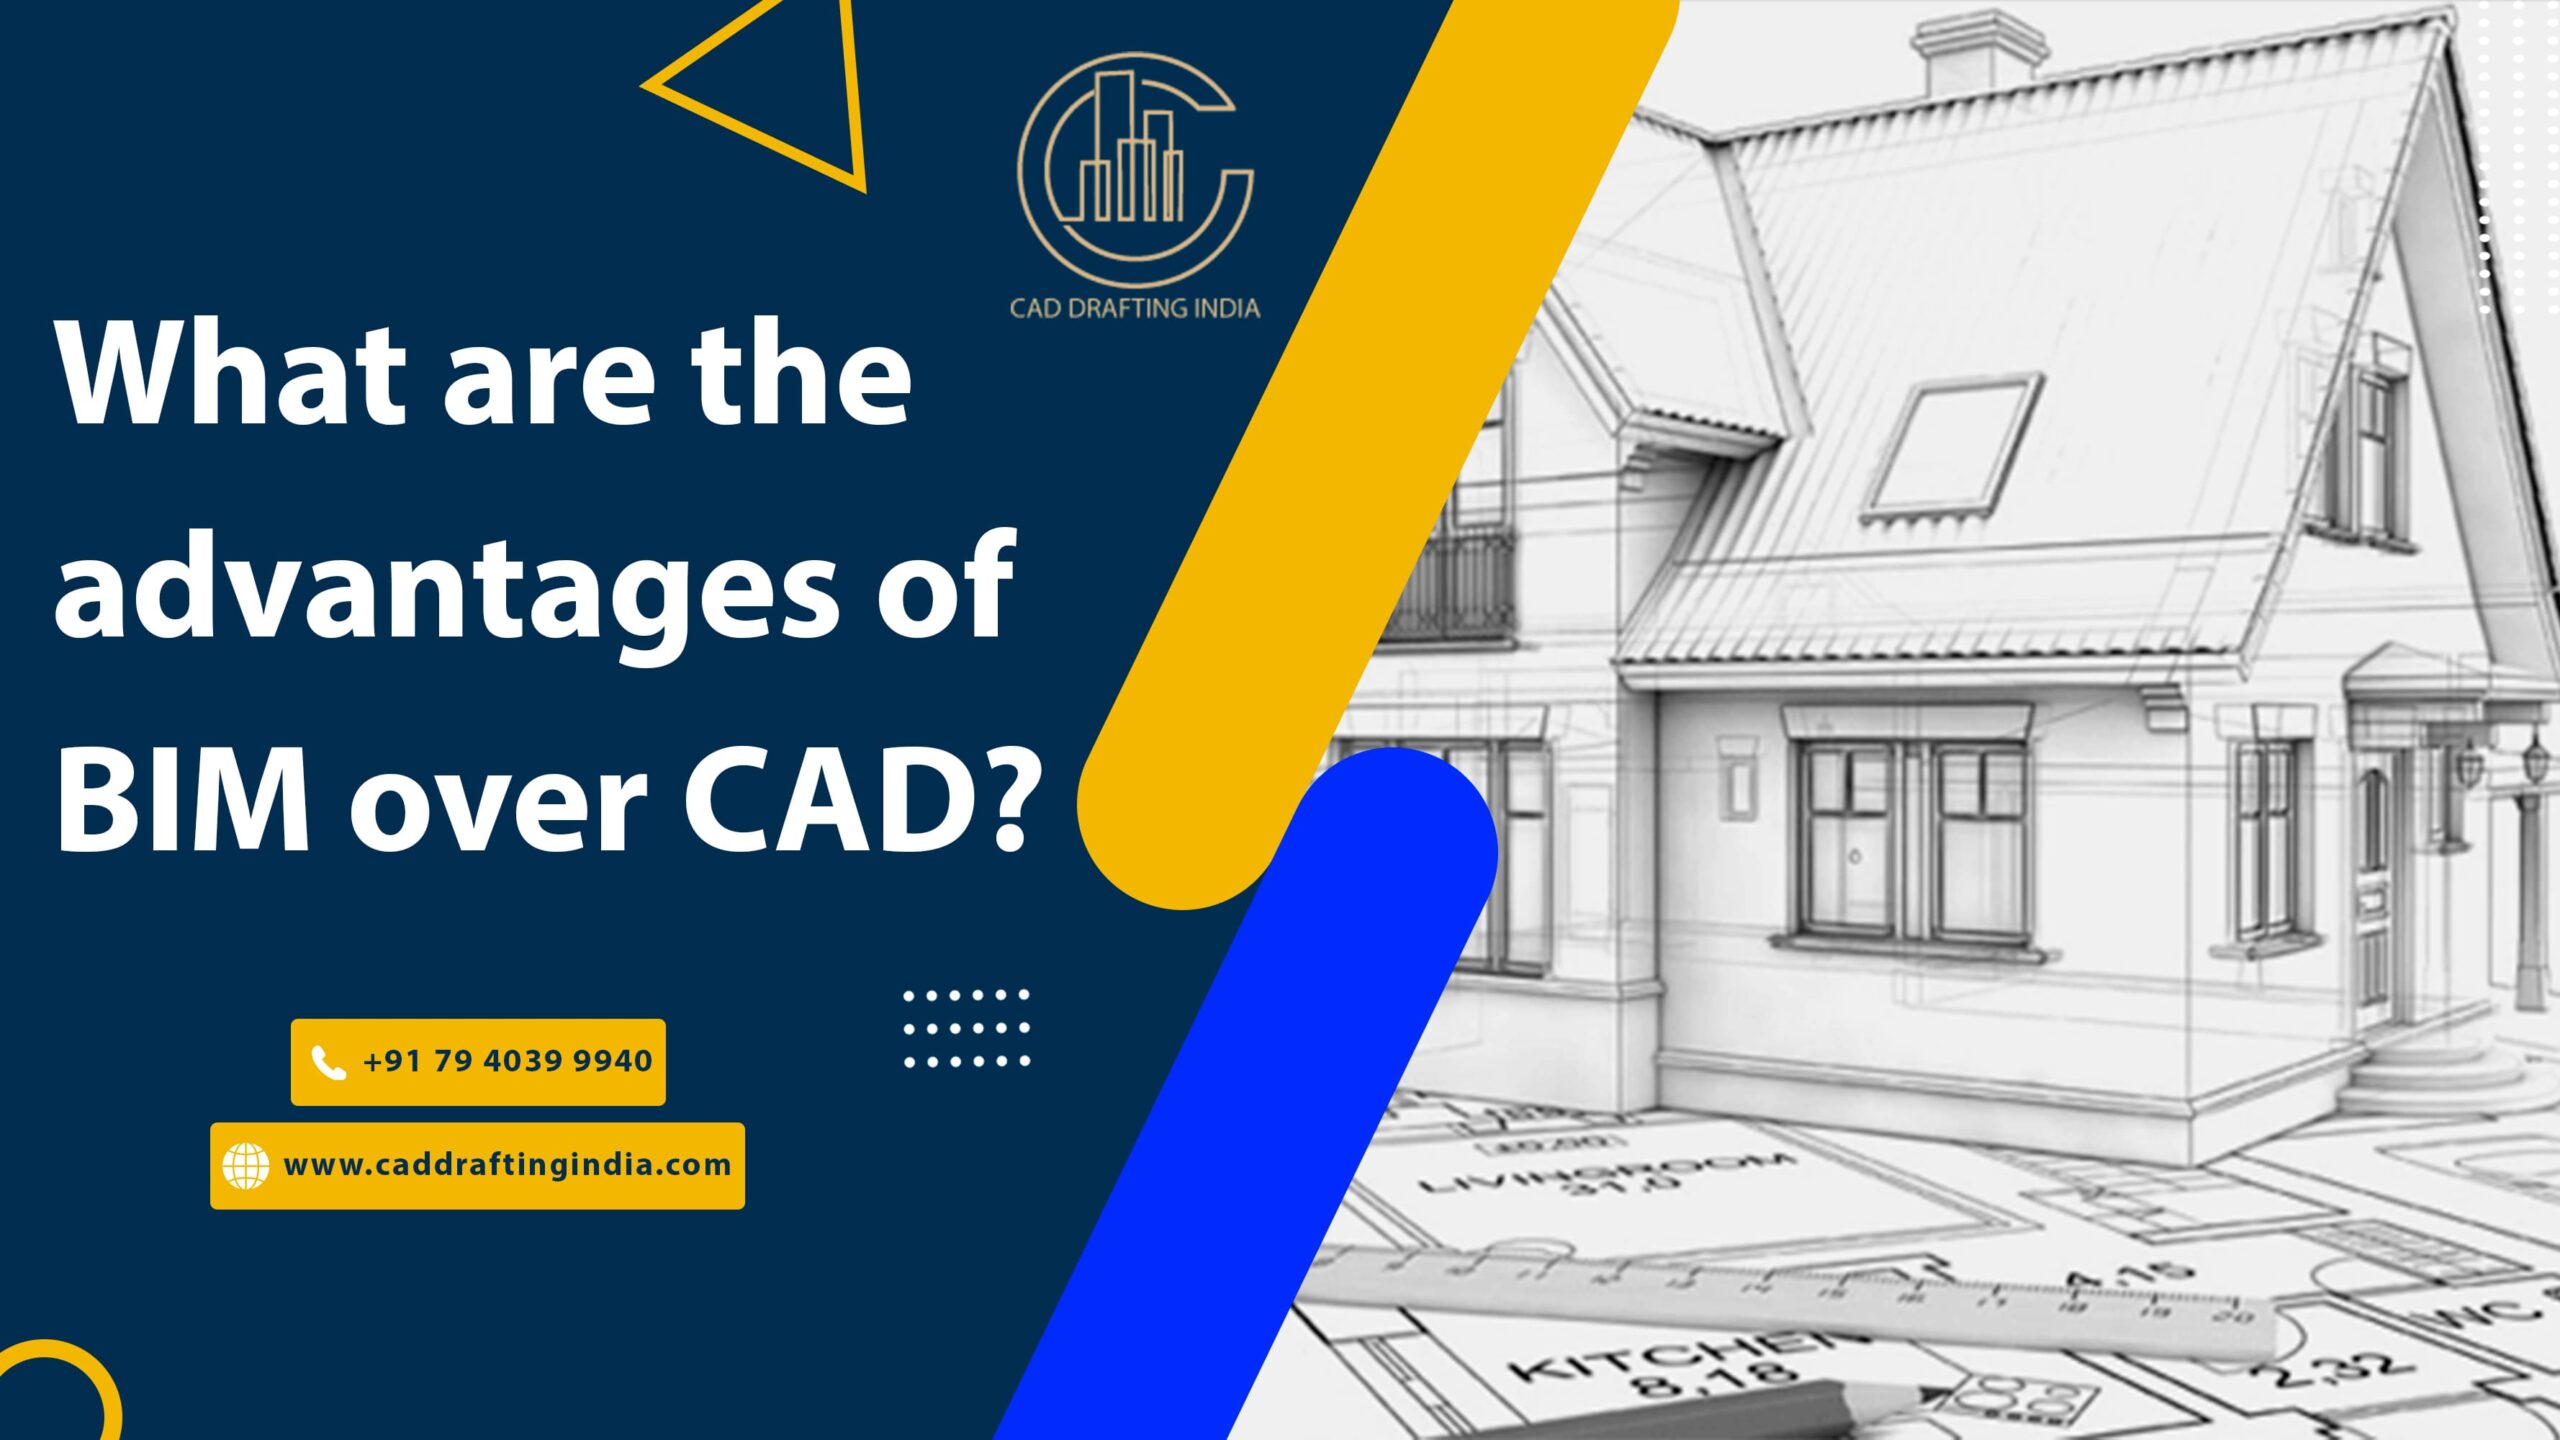 What are the advantages of BIM over CAD